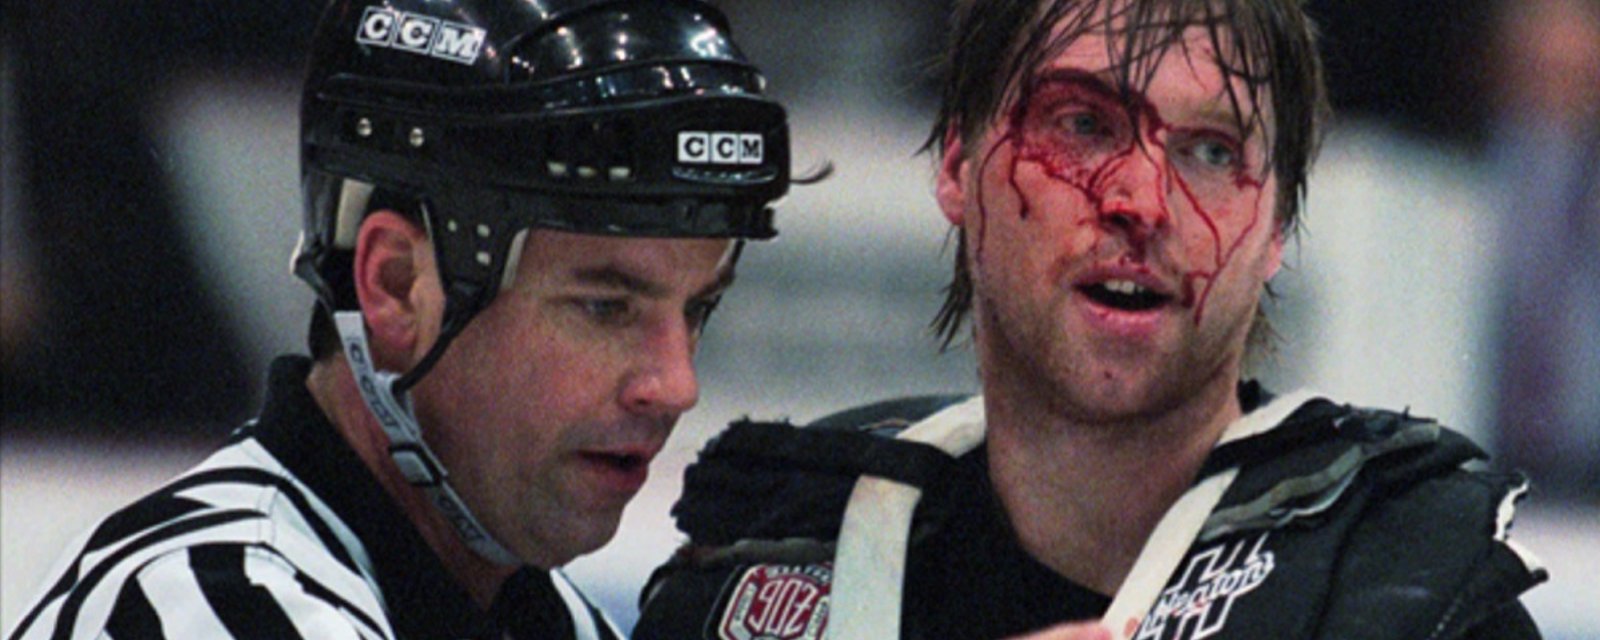 20 years ago this month, the “Brawl in Hockeytown.”